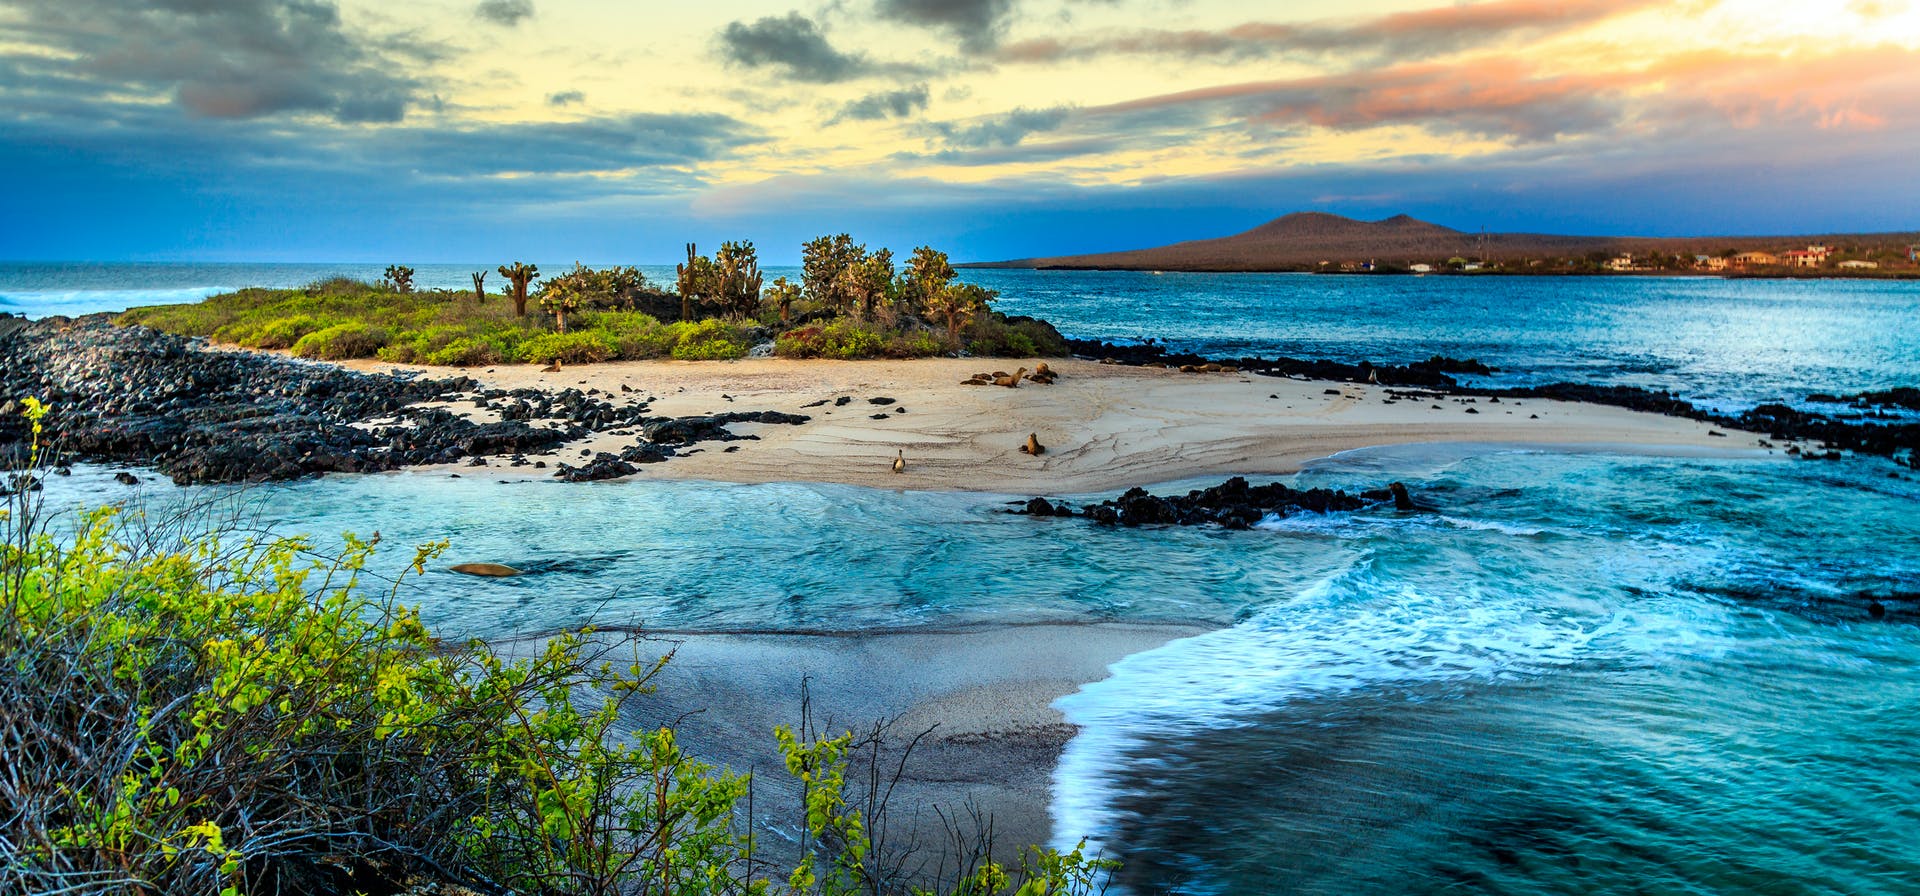 Island Hopping Adventure in the Galapagos Islands